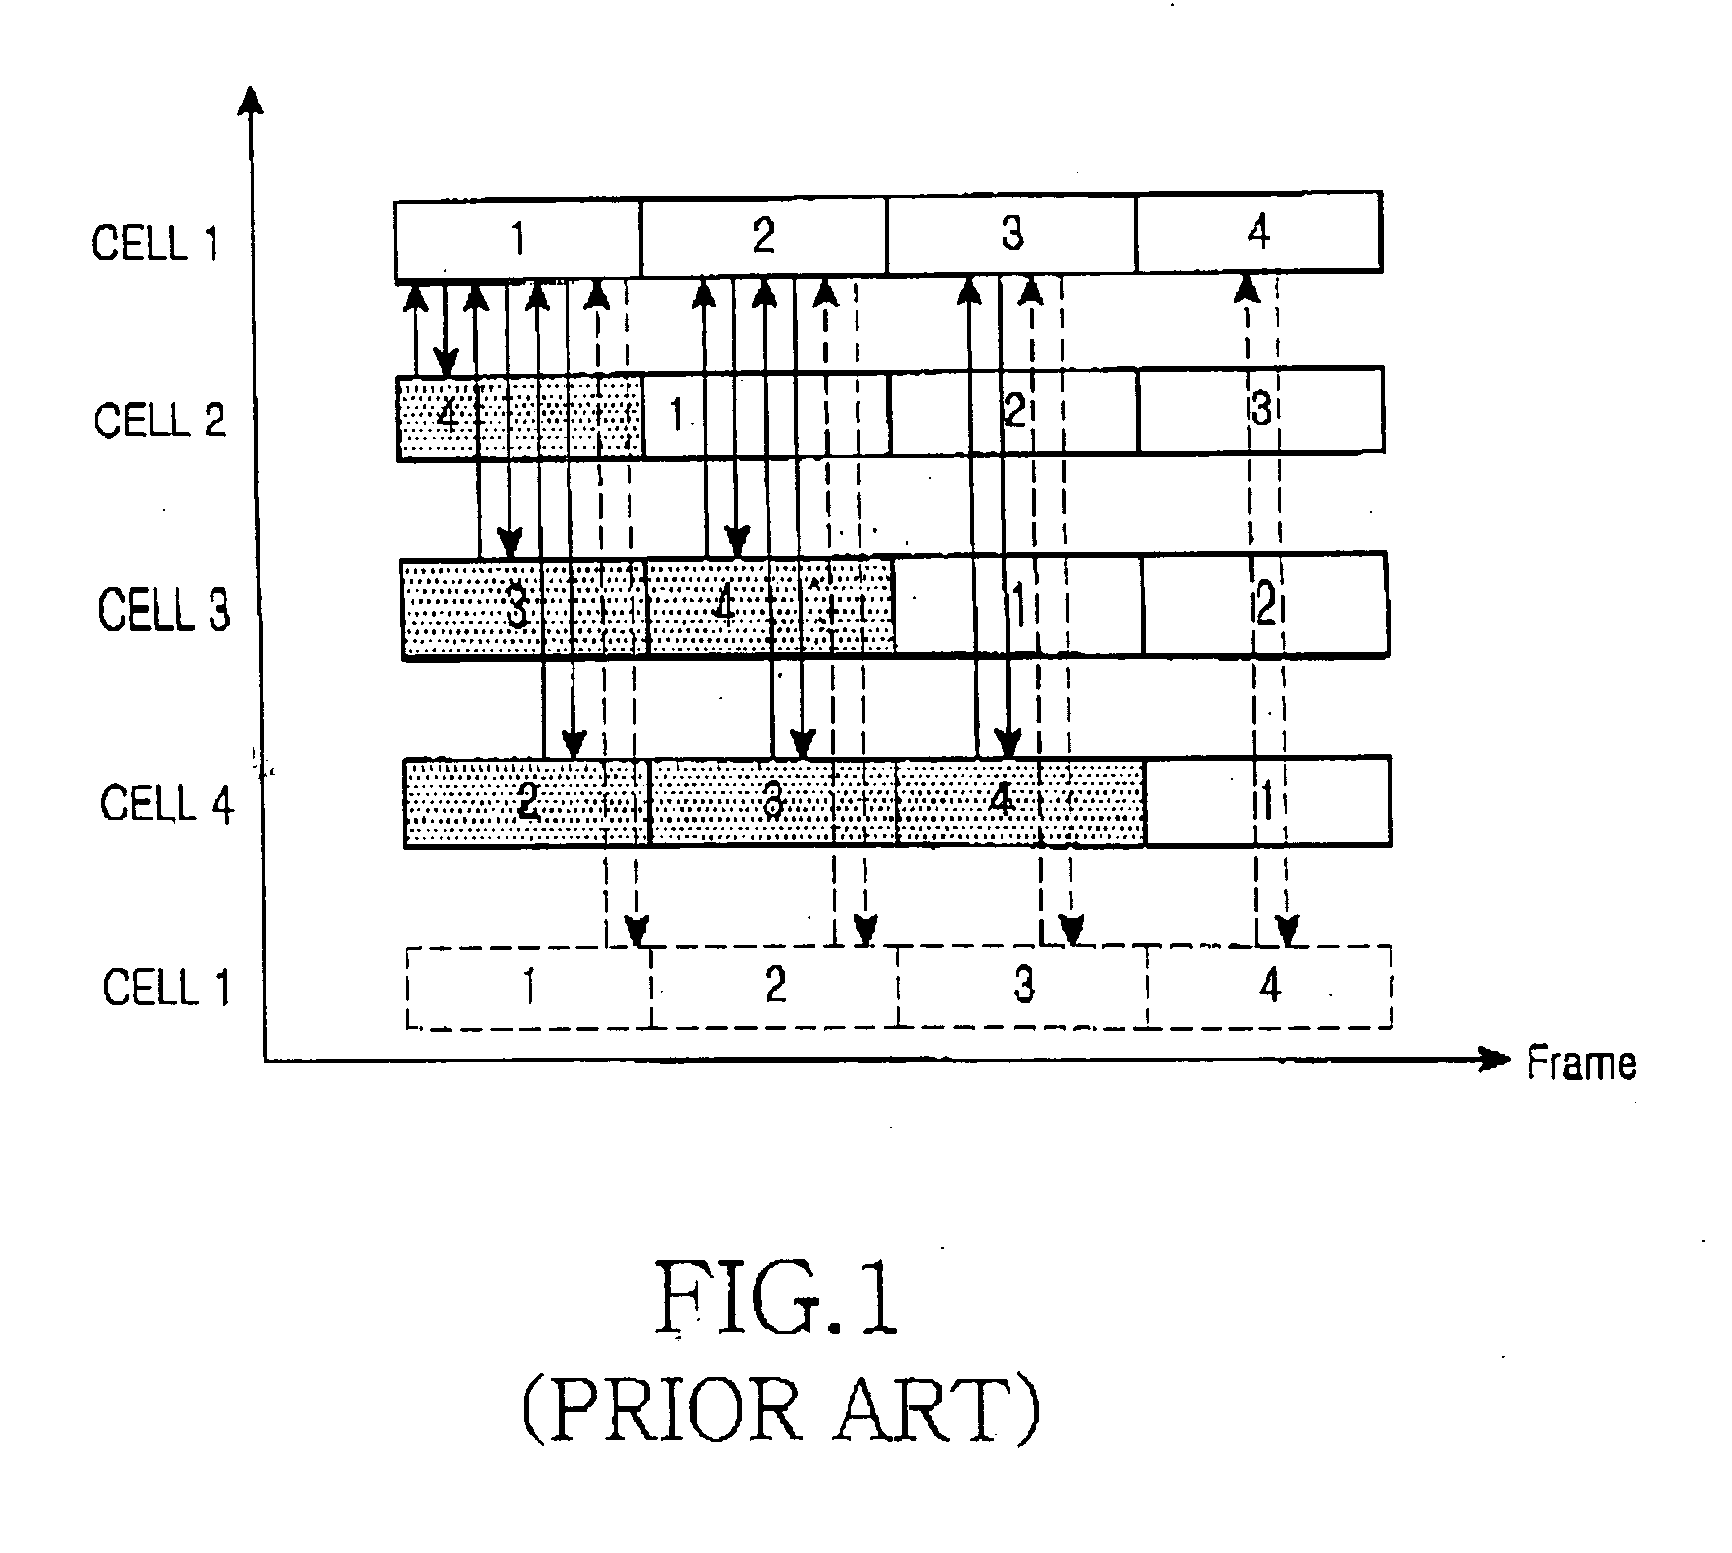 Apparatus and method for dynamically allocating resources in a communication system using an orthogonal frequency division multiple access scheme